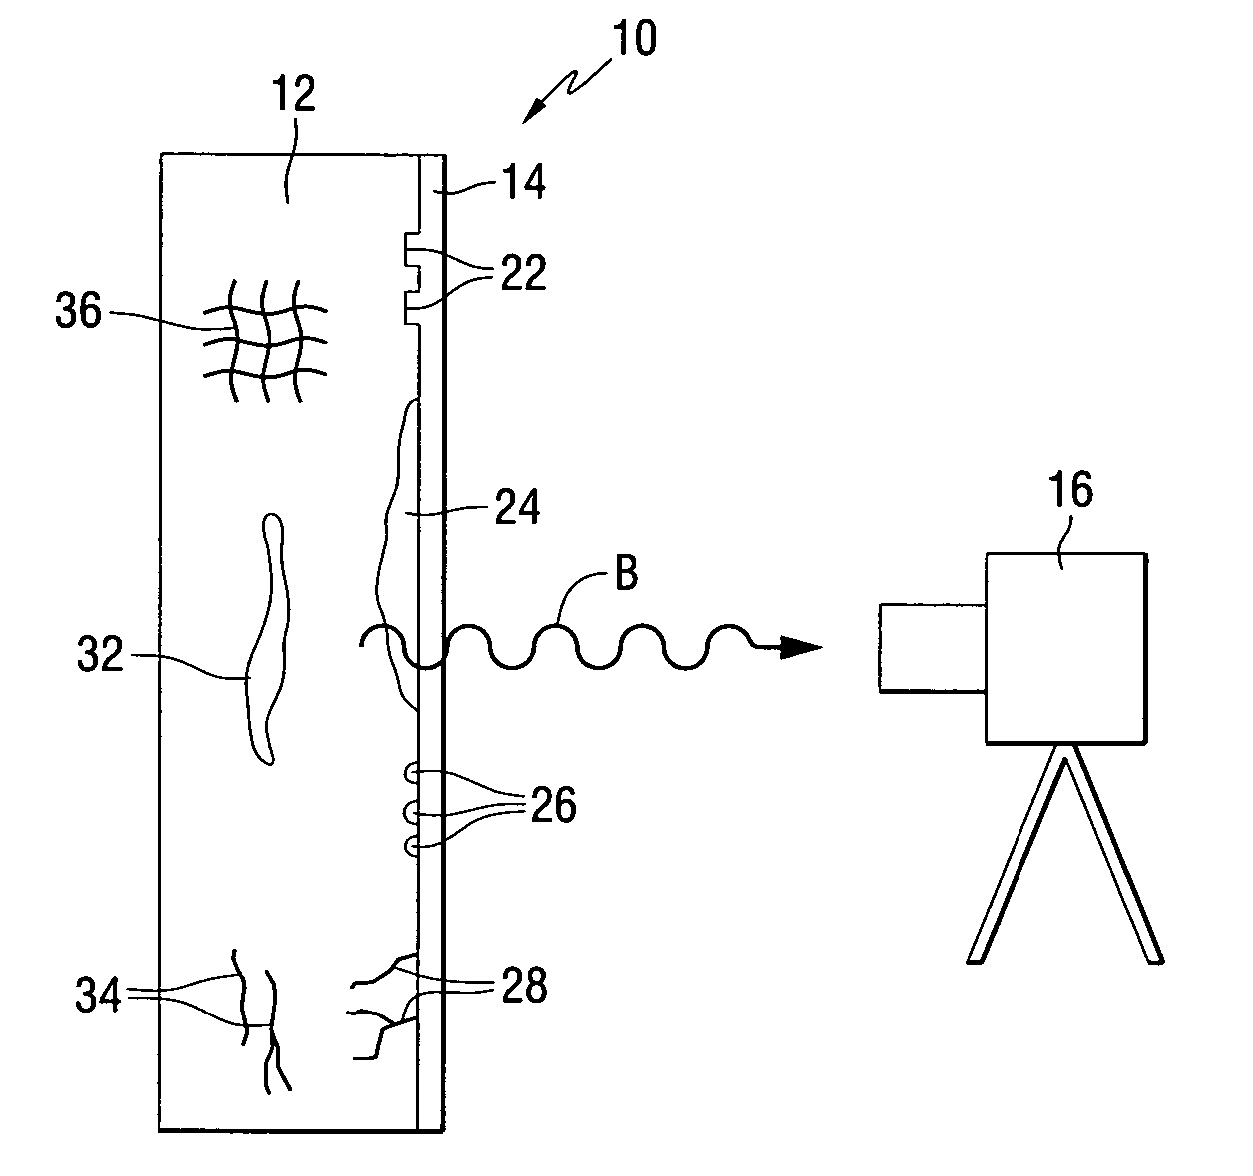 System for detecting structural defects and features utilizing blackbody self-illumination